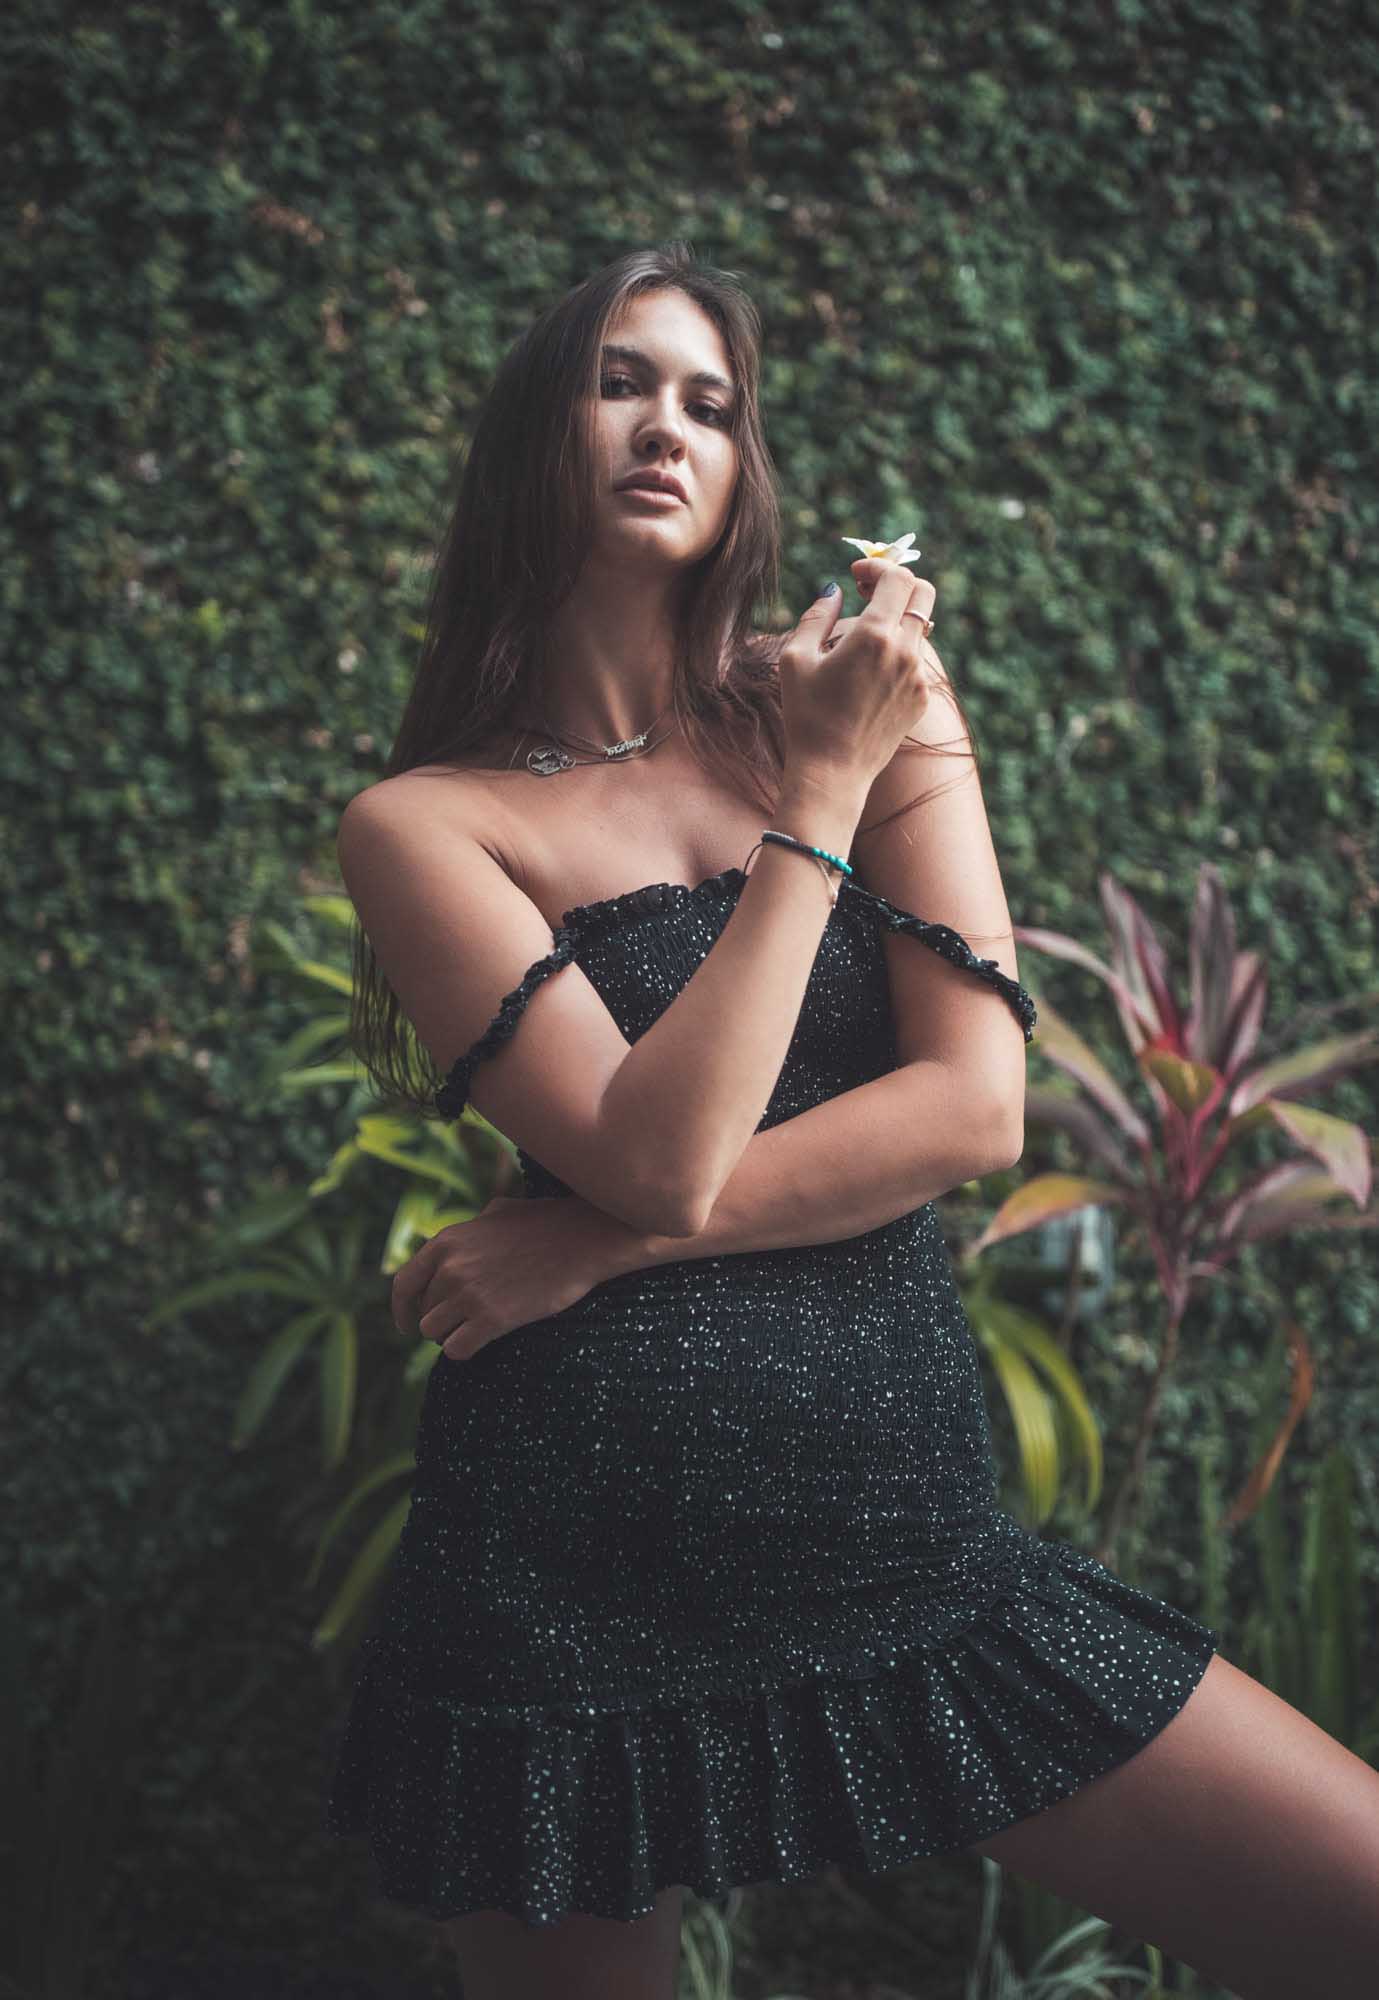 Woman in black dress poses with a flower | Fashion Photography | Portrait | Lifestyle Photography | Canggu ,Bali, Indonesia  | Denver Photographer